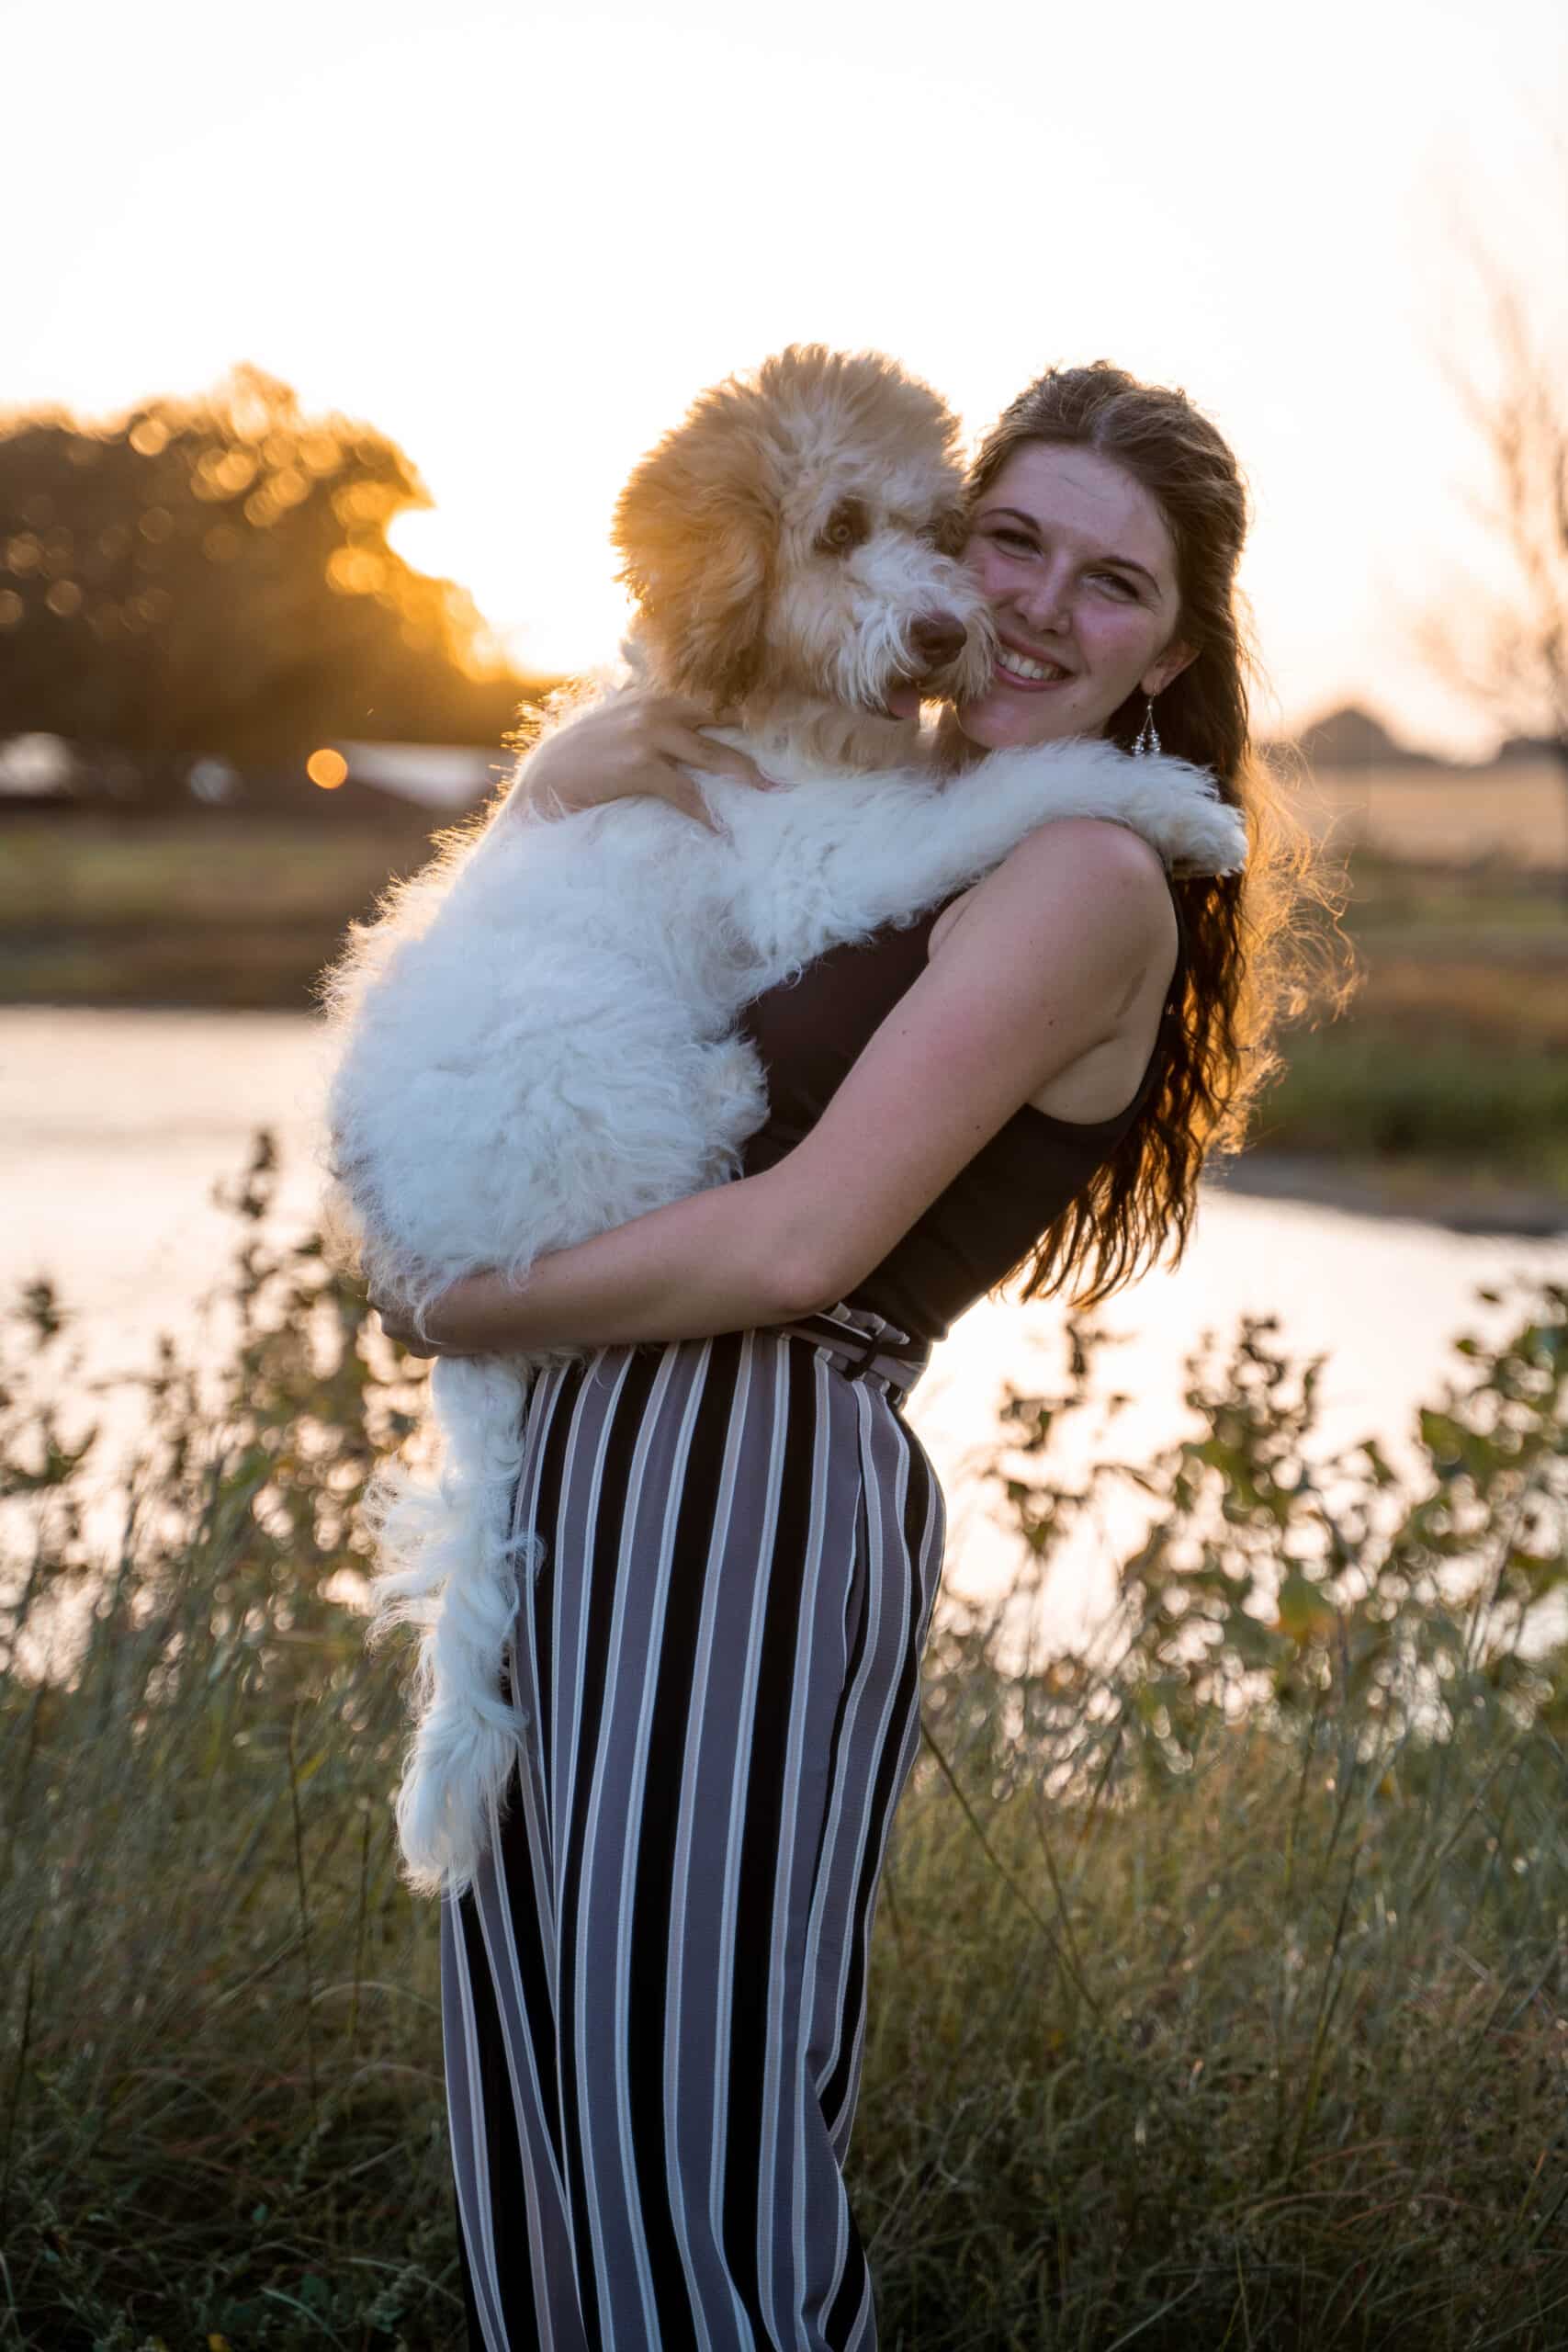 A ark-haired young woman, Kathryn Ribbens, poses in front of a lake holding a Bernedoodle dog. Photo provided by Kathryn Ribbens.